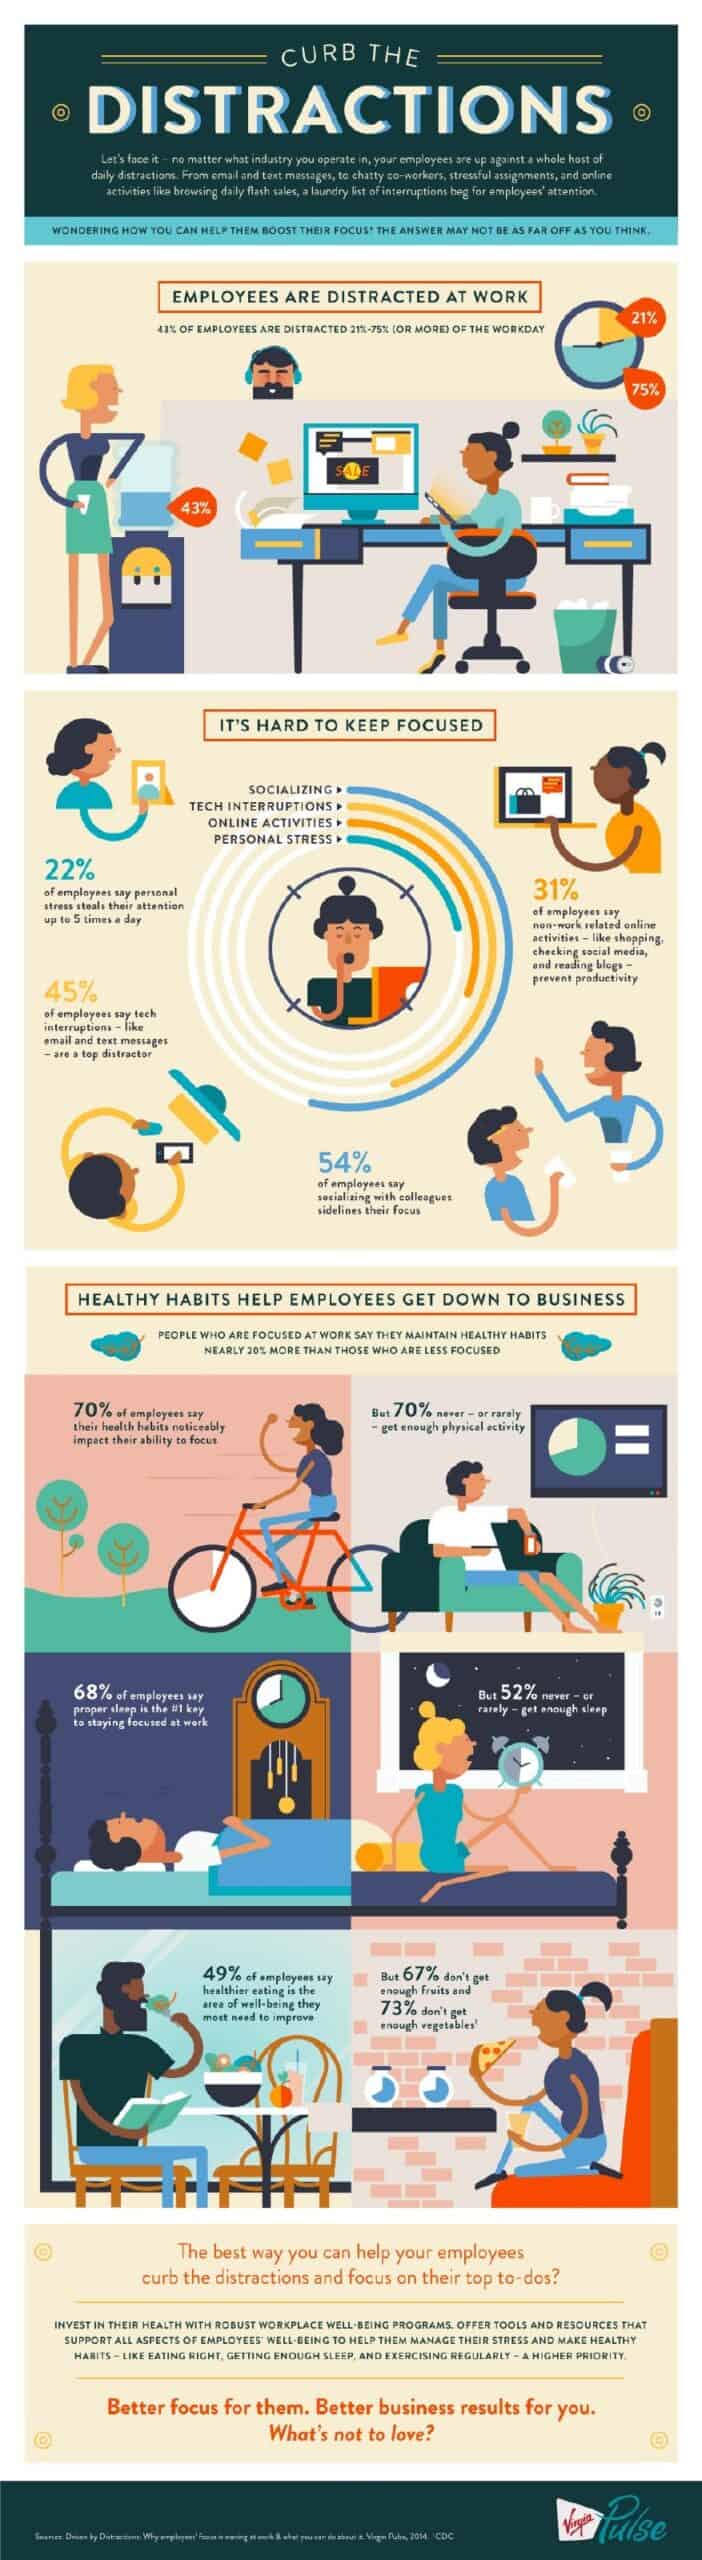 Infographic titled 'Curb the Distractions' highlighting workplace distractions and their impact on employees' focus. It shows statistics on how 43% of employees are distracted 21-75% of the workday by emails, chats, and meetings. It emphasizes that personal stress, tech interruptions, and online activities are major focus stealers, with 22% citing stress as a distraction up to five times a day. It also covers how socializing with colleagues affects 54% of employees' concentration. The infographic advocates for healthy habits, noting that 70% of focused employees maintain better health routines, while a majority lack sufficient physical activity and sleep. It suggests that proper sleep, exercise, and nutrition can enhance focus at work, with a call to action for investing in employees' well-being to improve business outcomes.